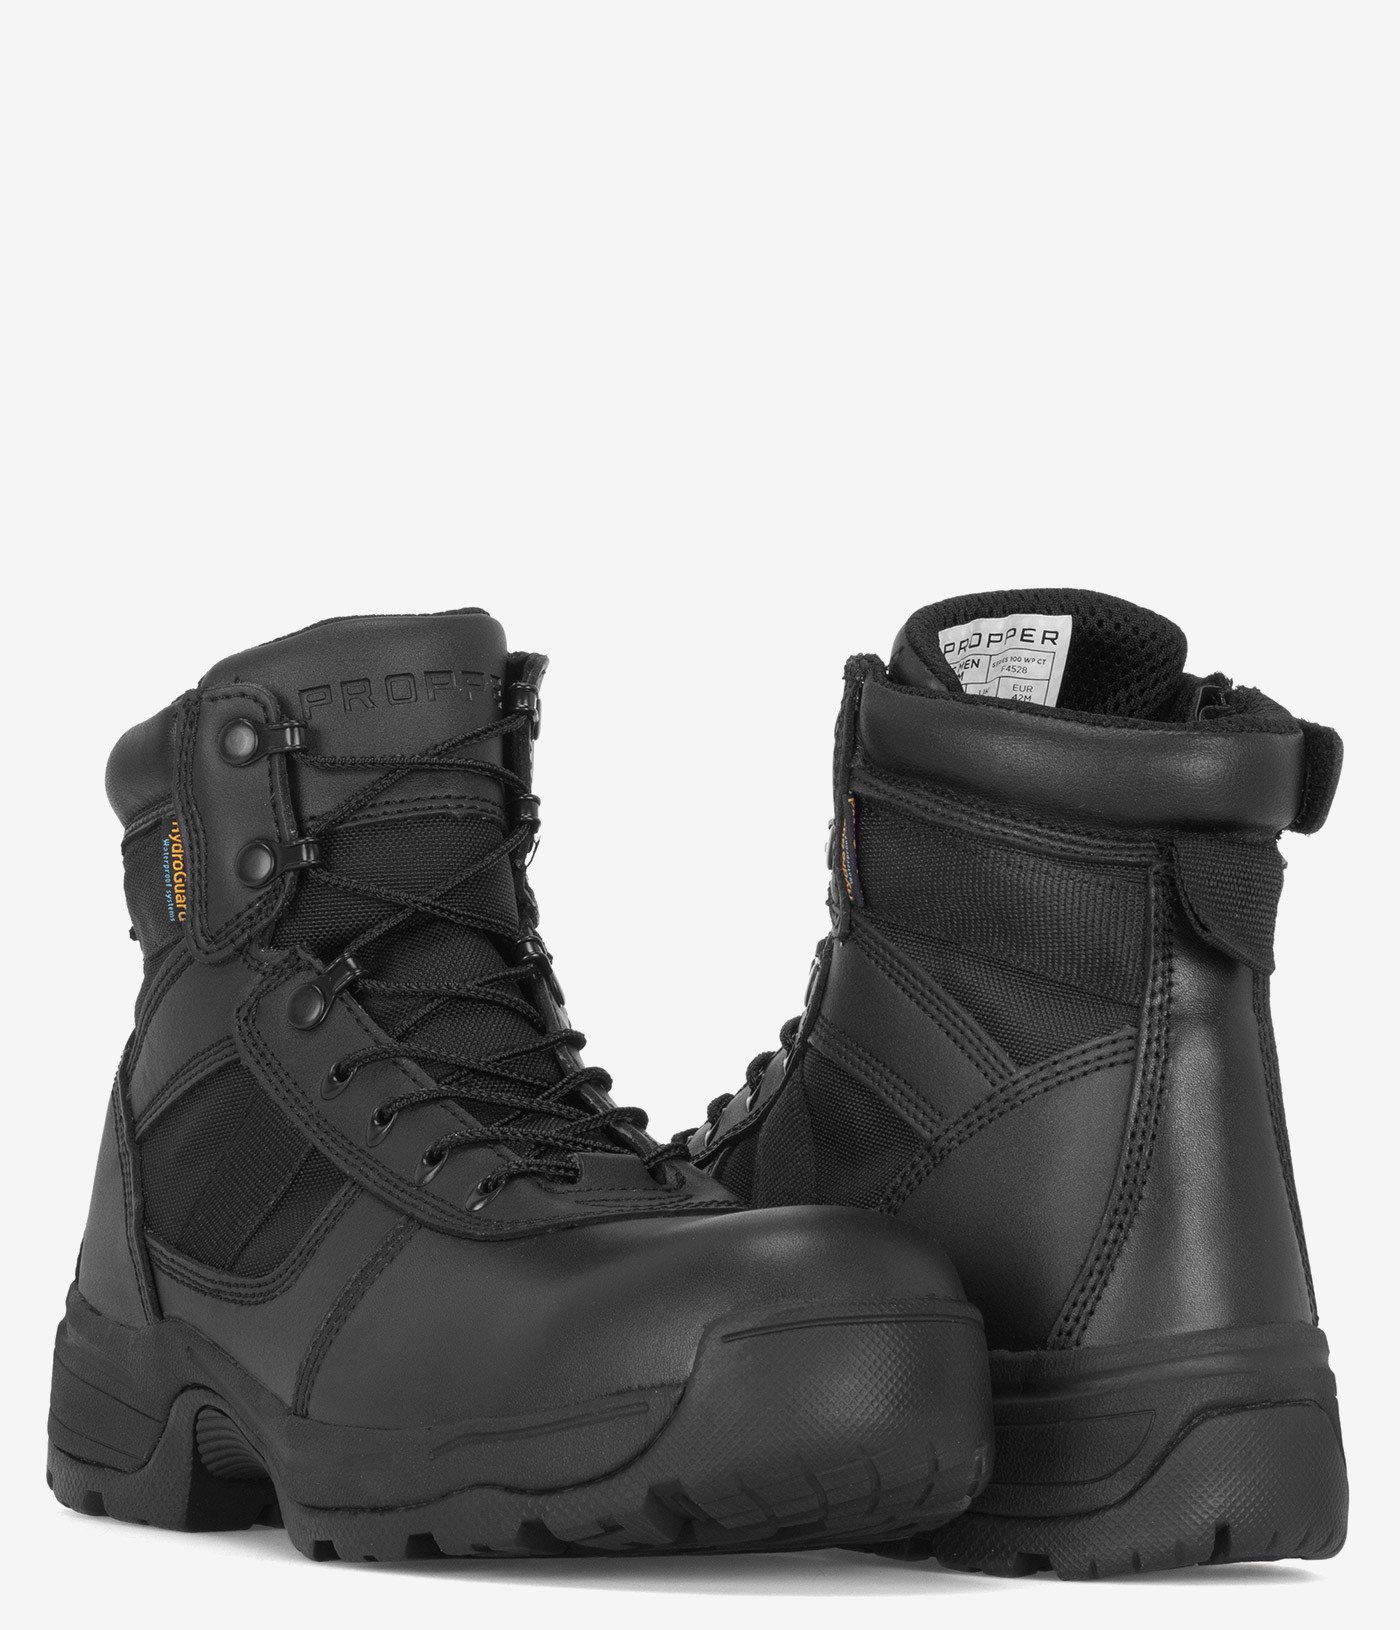 Propper Series 100 6" Waterproof Composite Safety Toe Tactical Boot